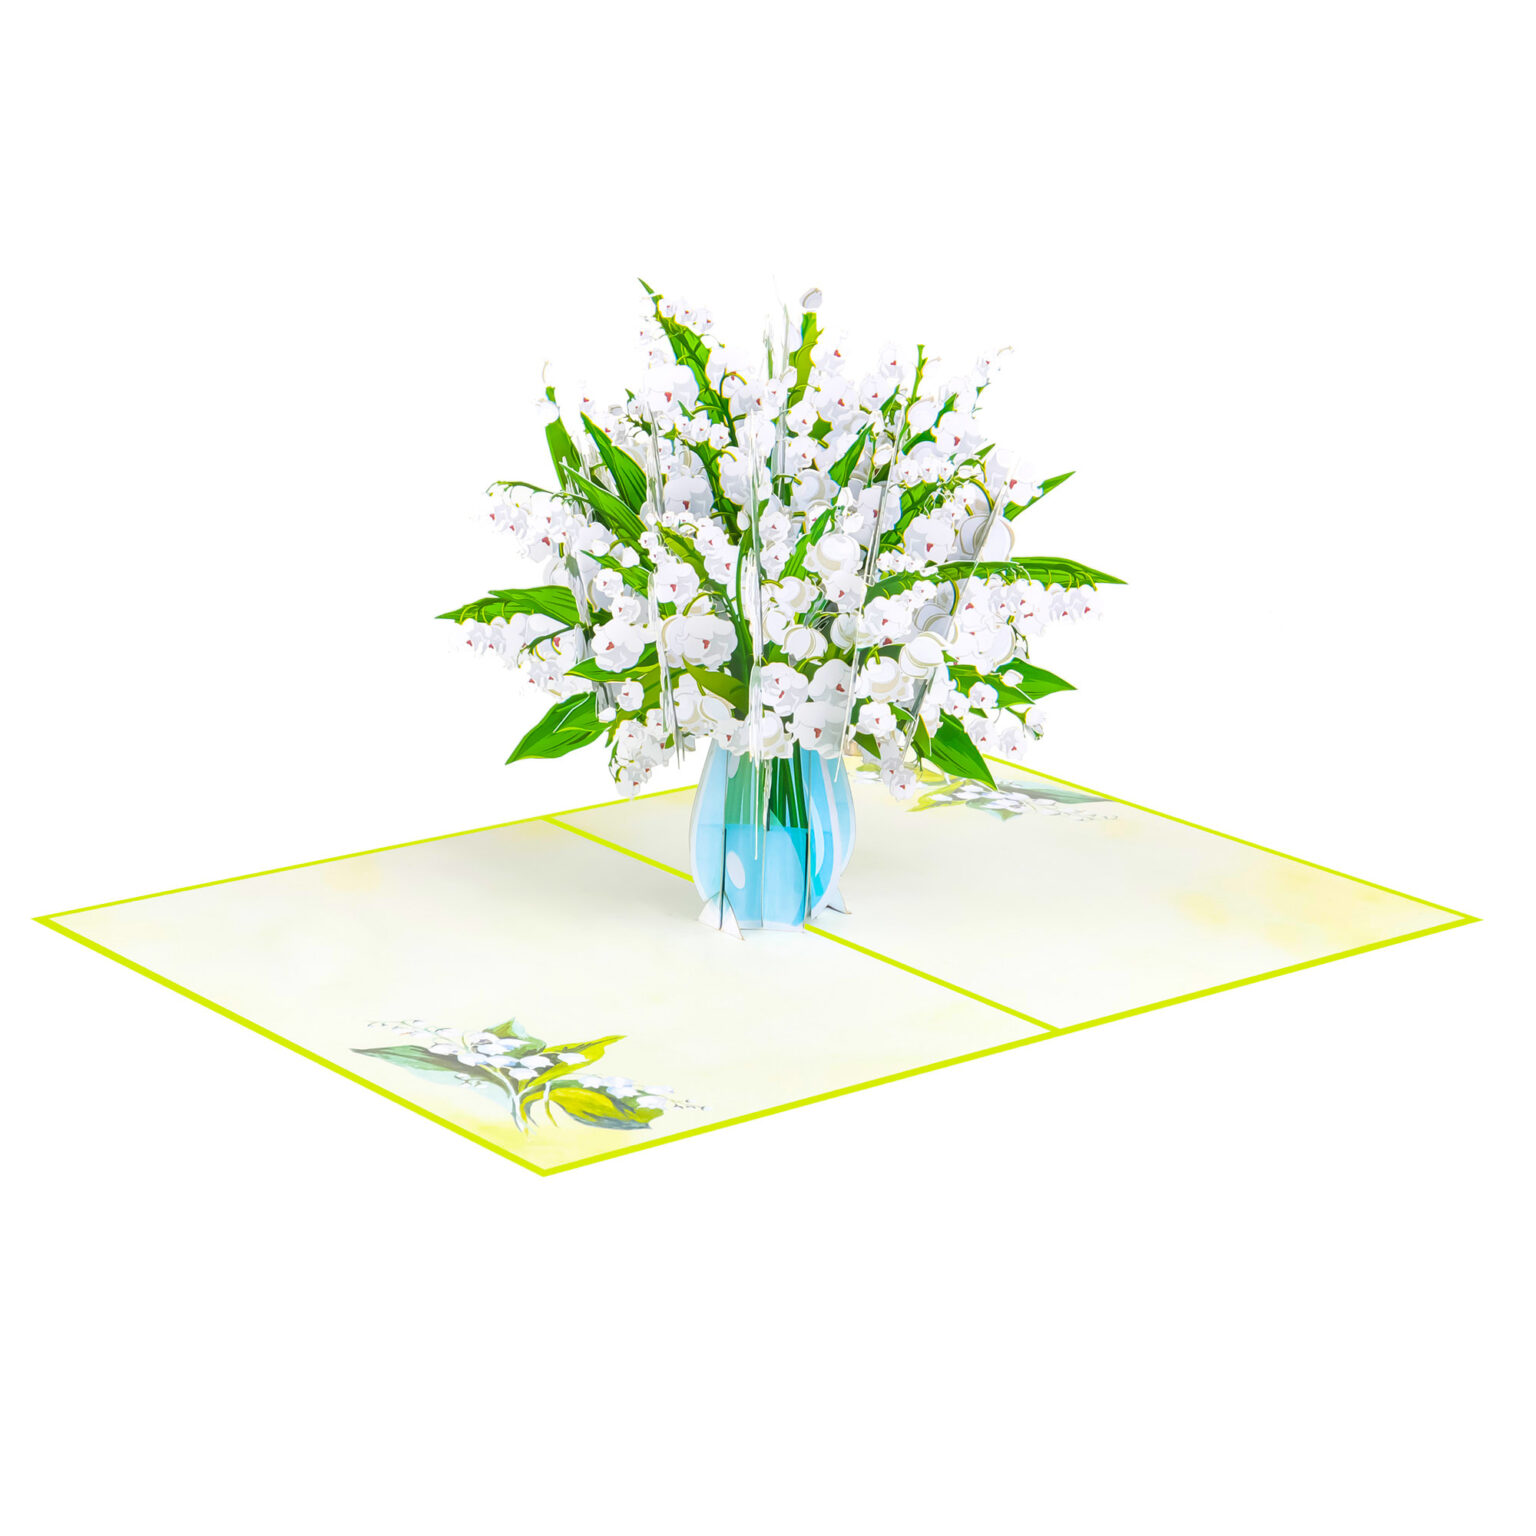 Lily of the valley vase pop up card